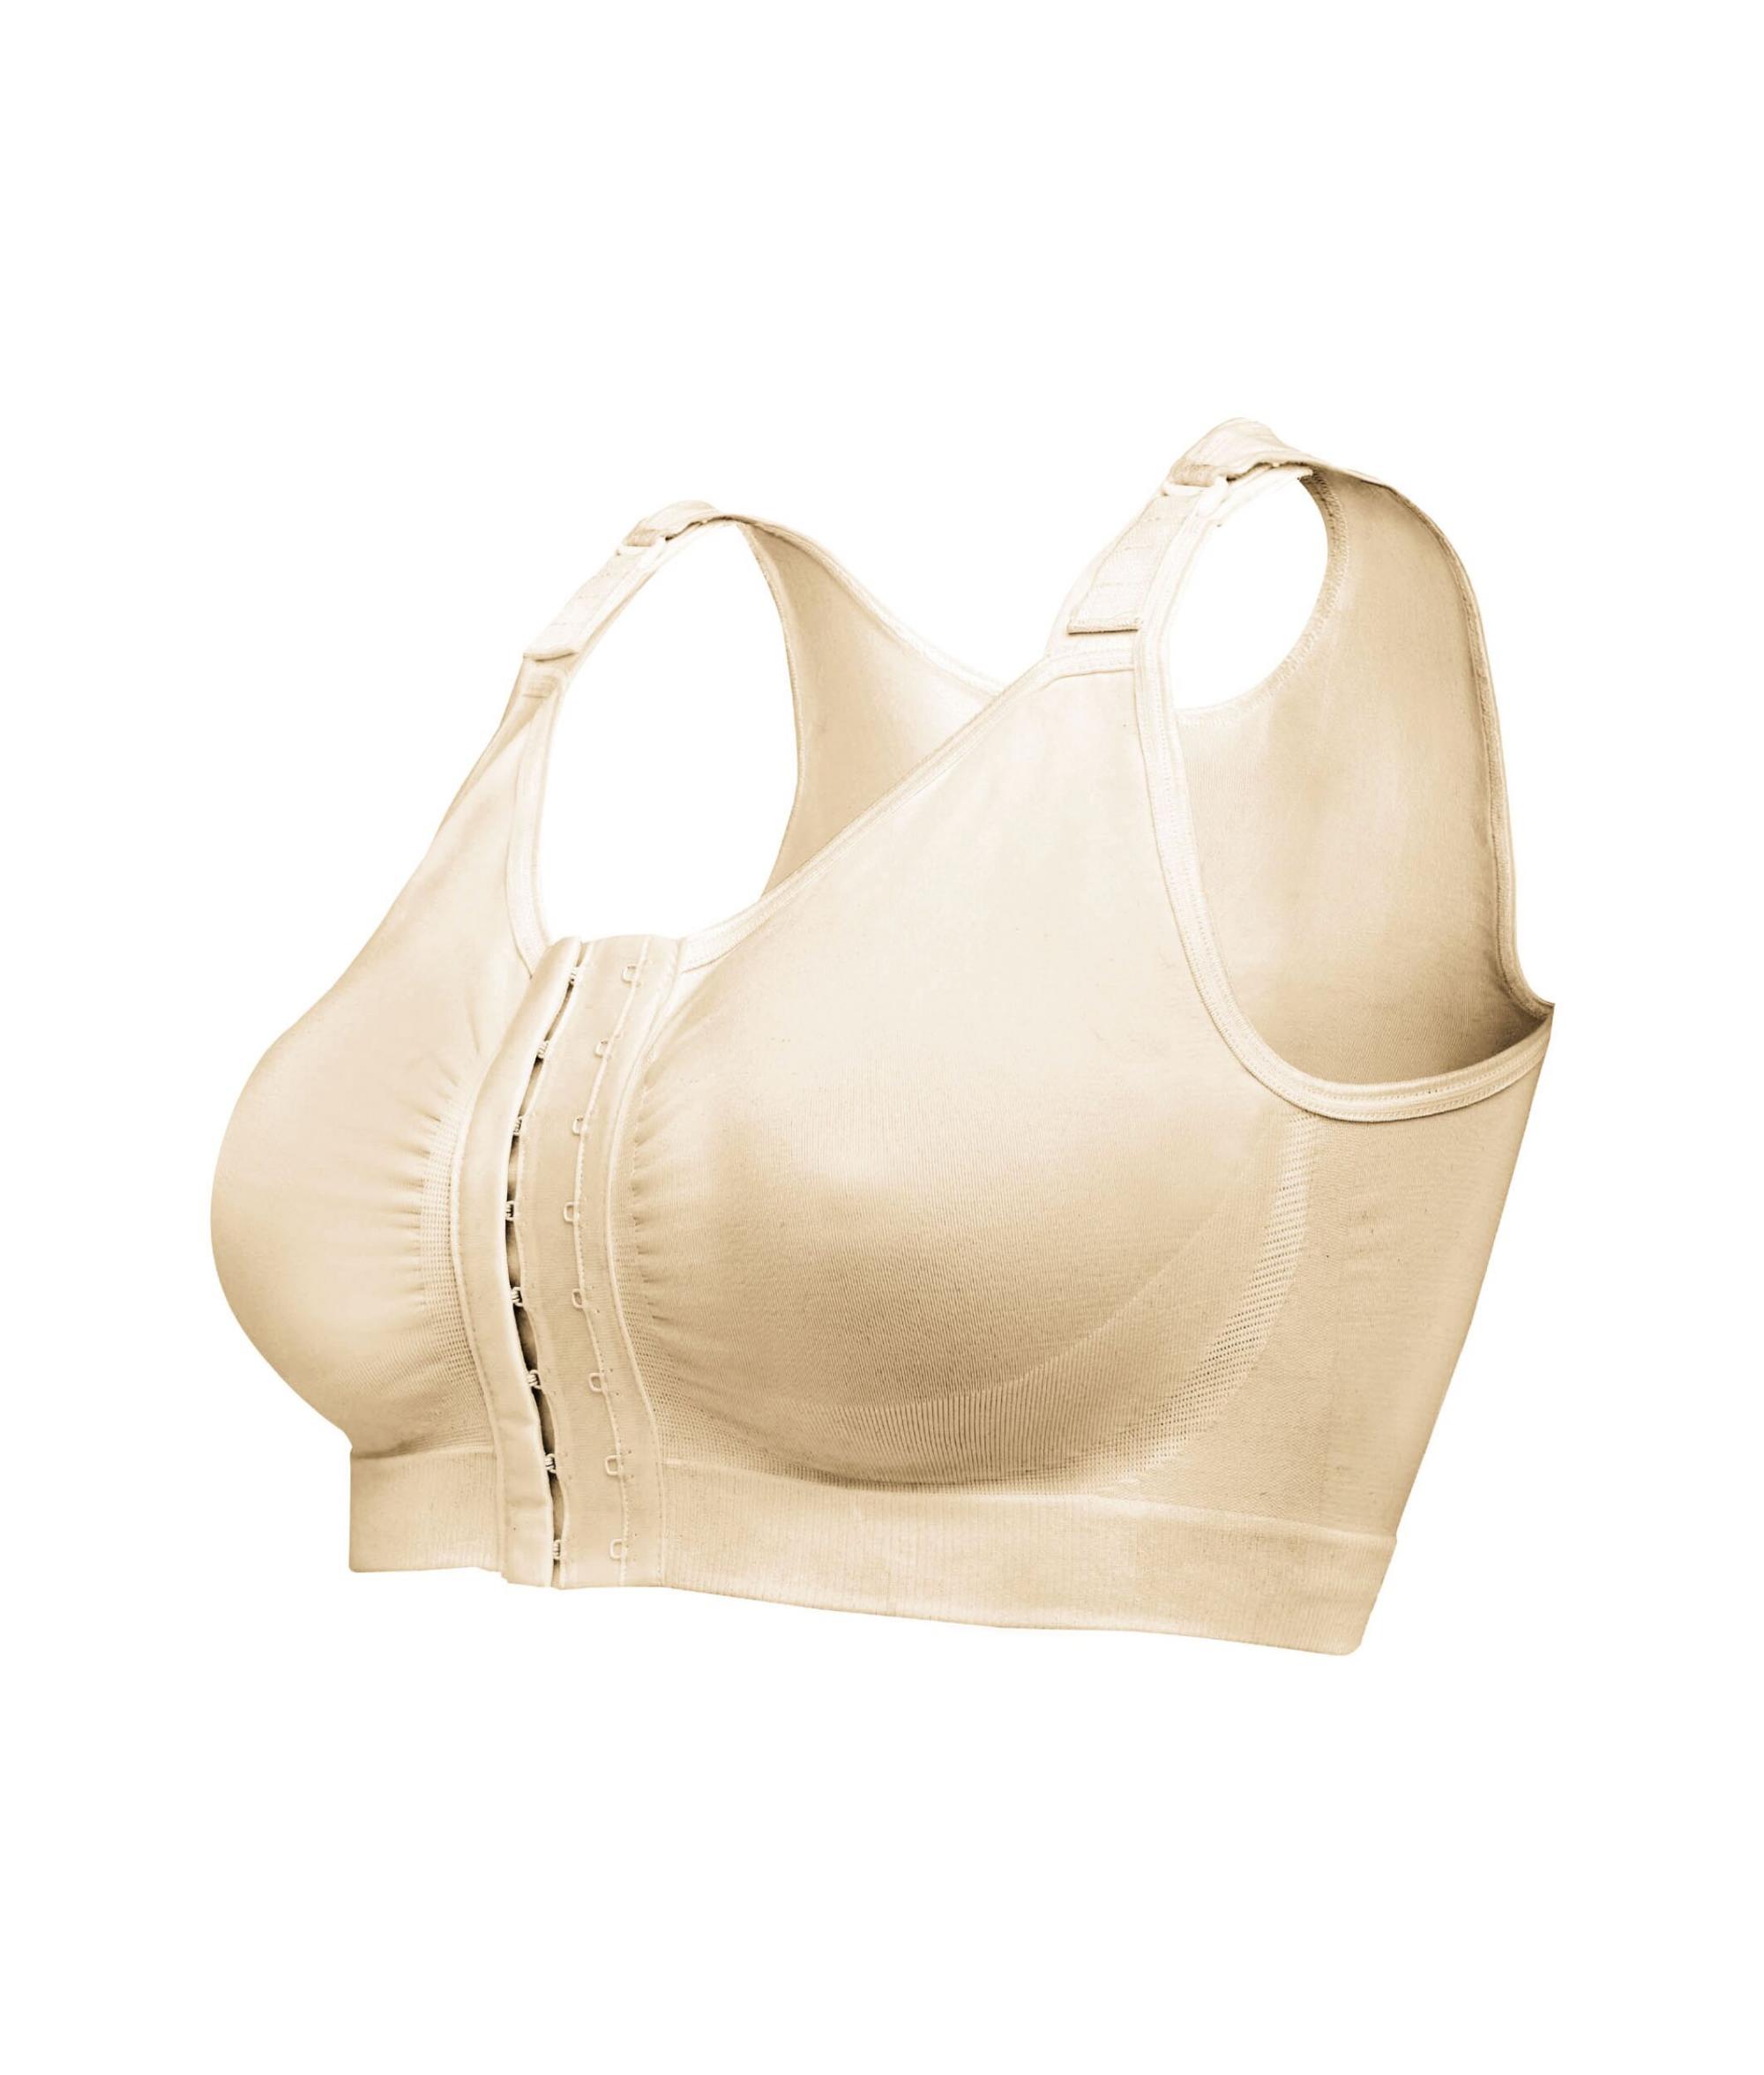 RecoBra Post Surgery Recovery Bra | Cancer Research UK Online Shop